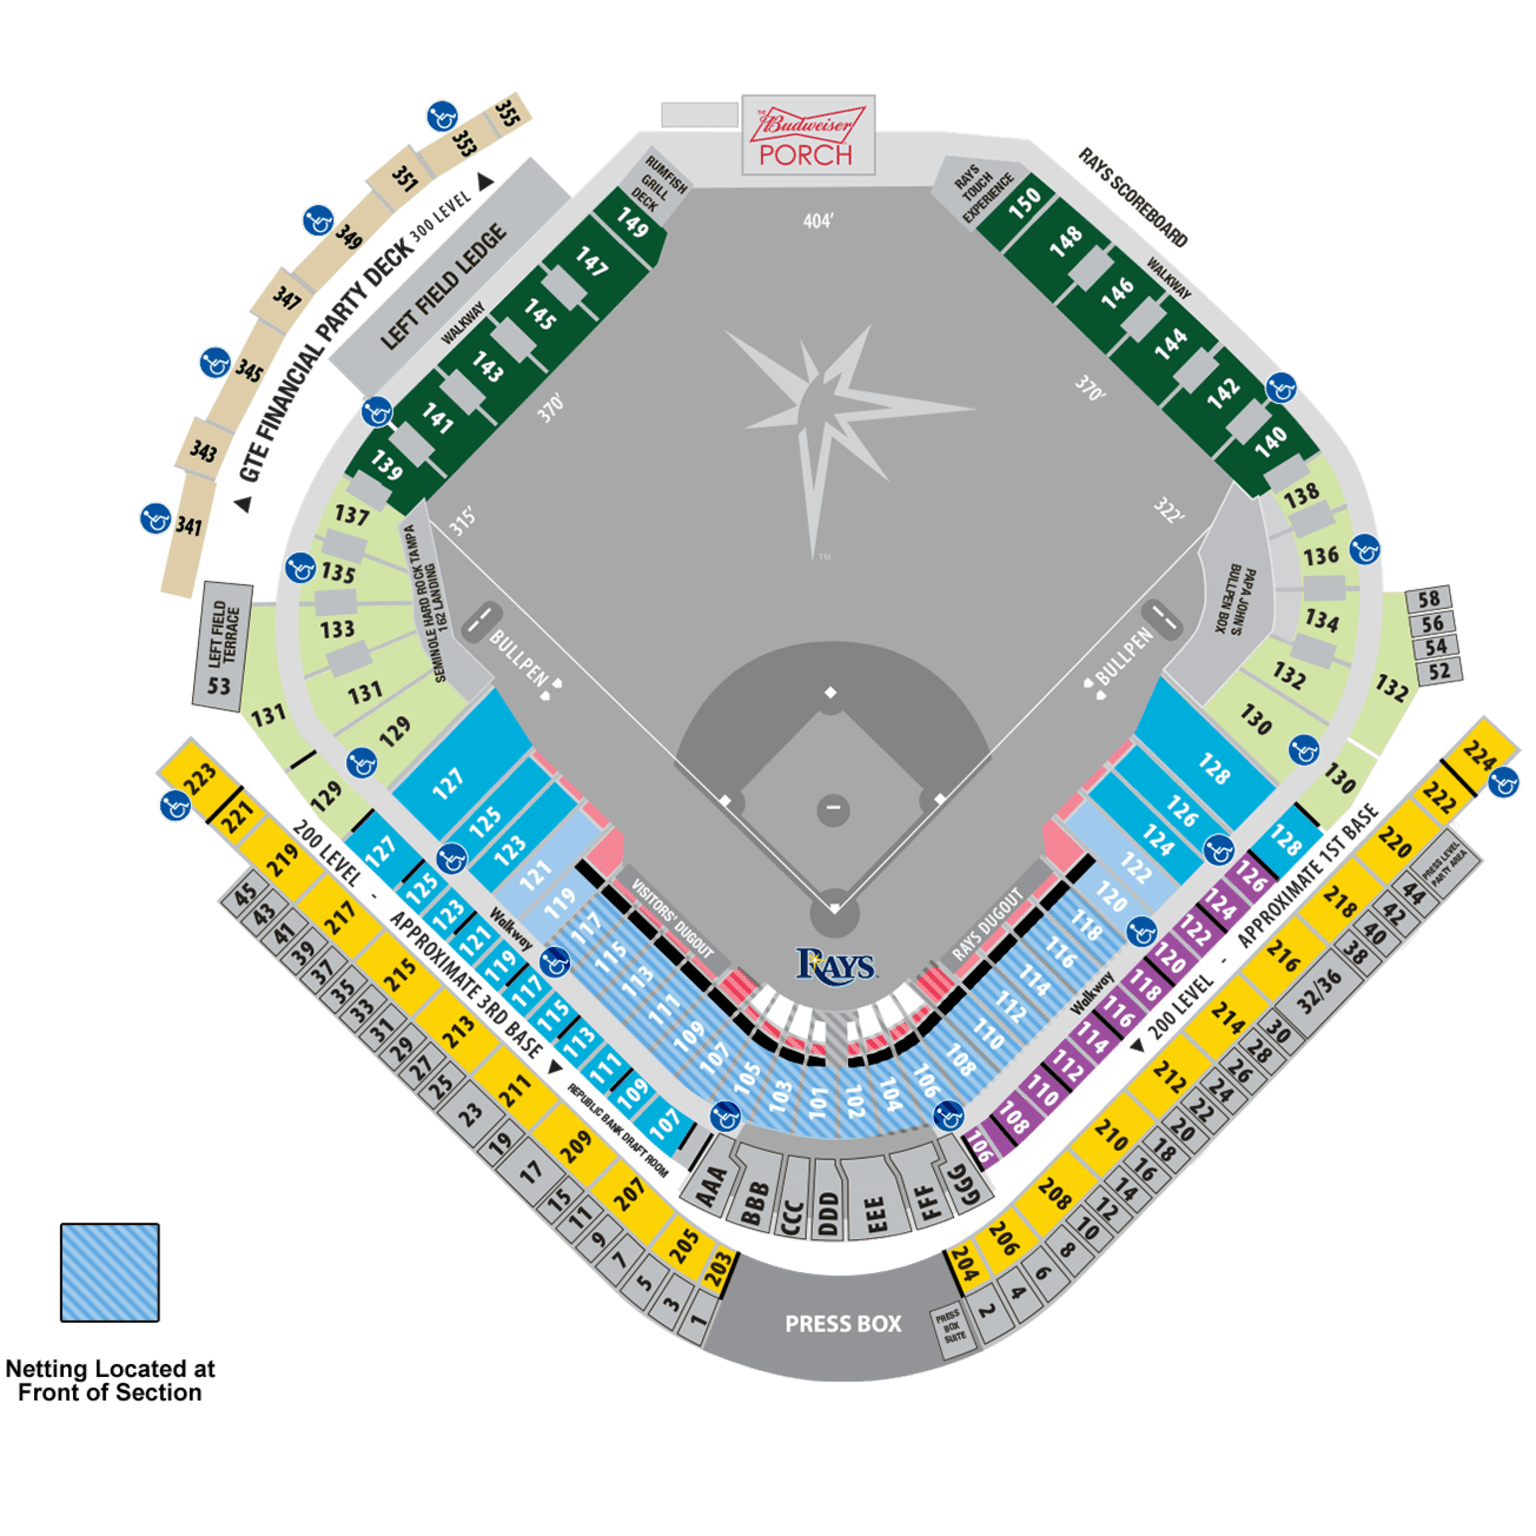 Tampa Bay Rays Seating Chart And Pricing Matttroy